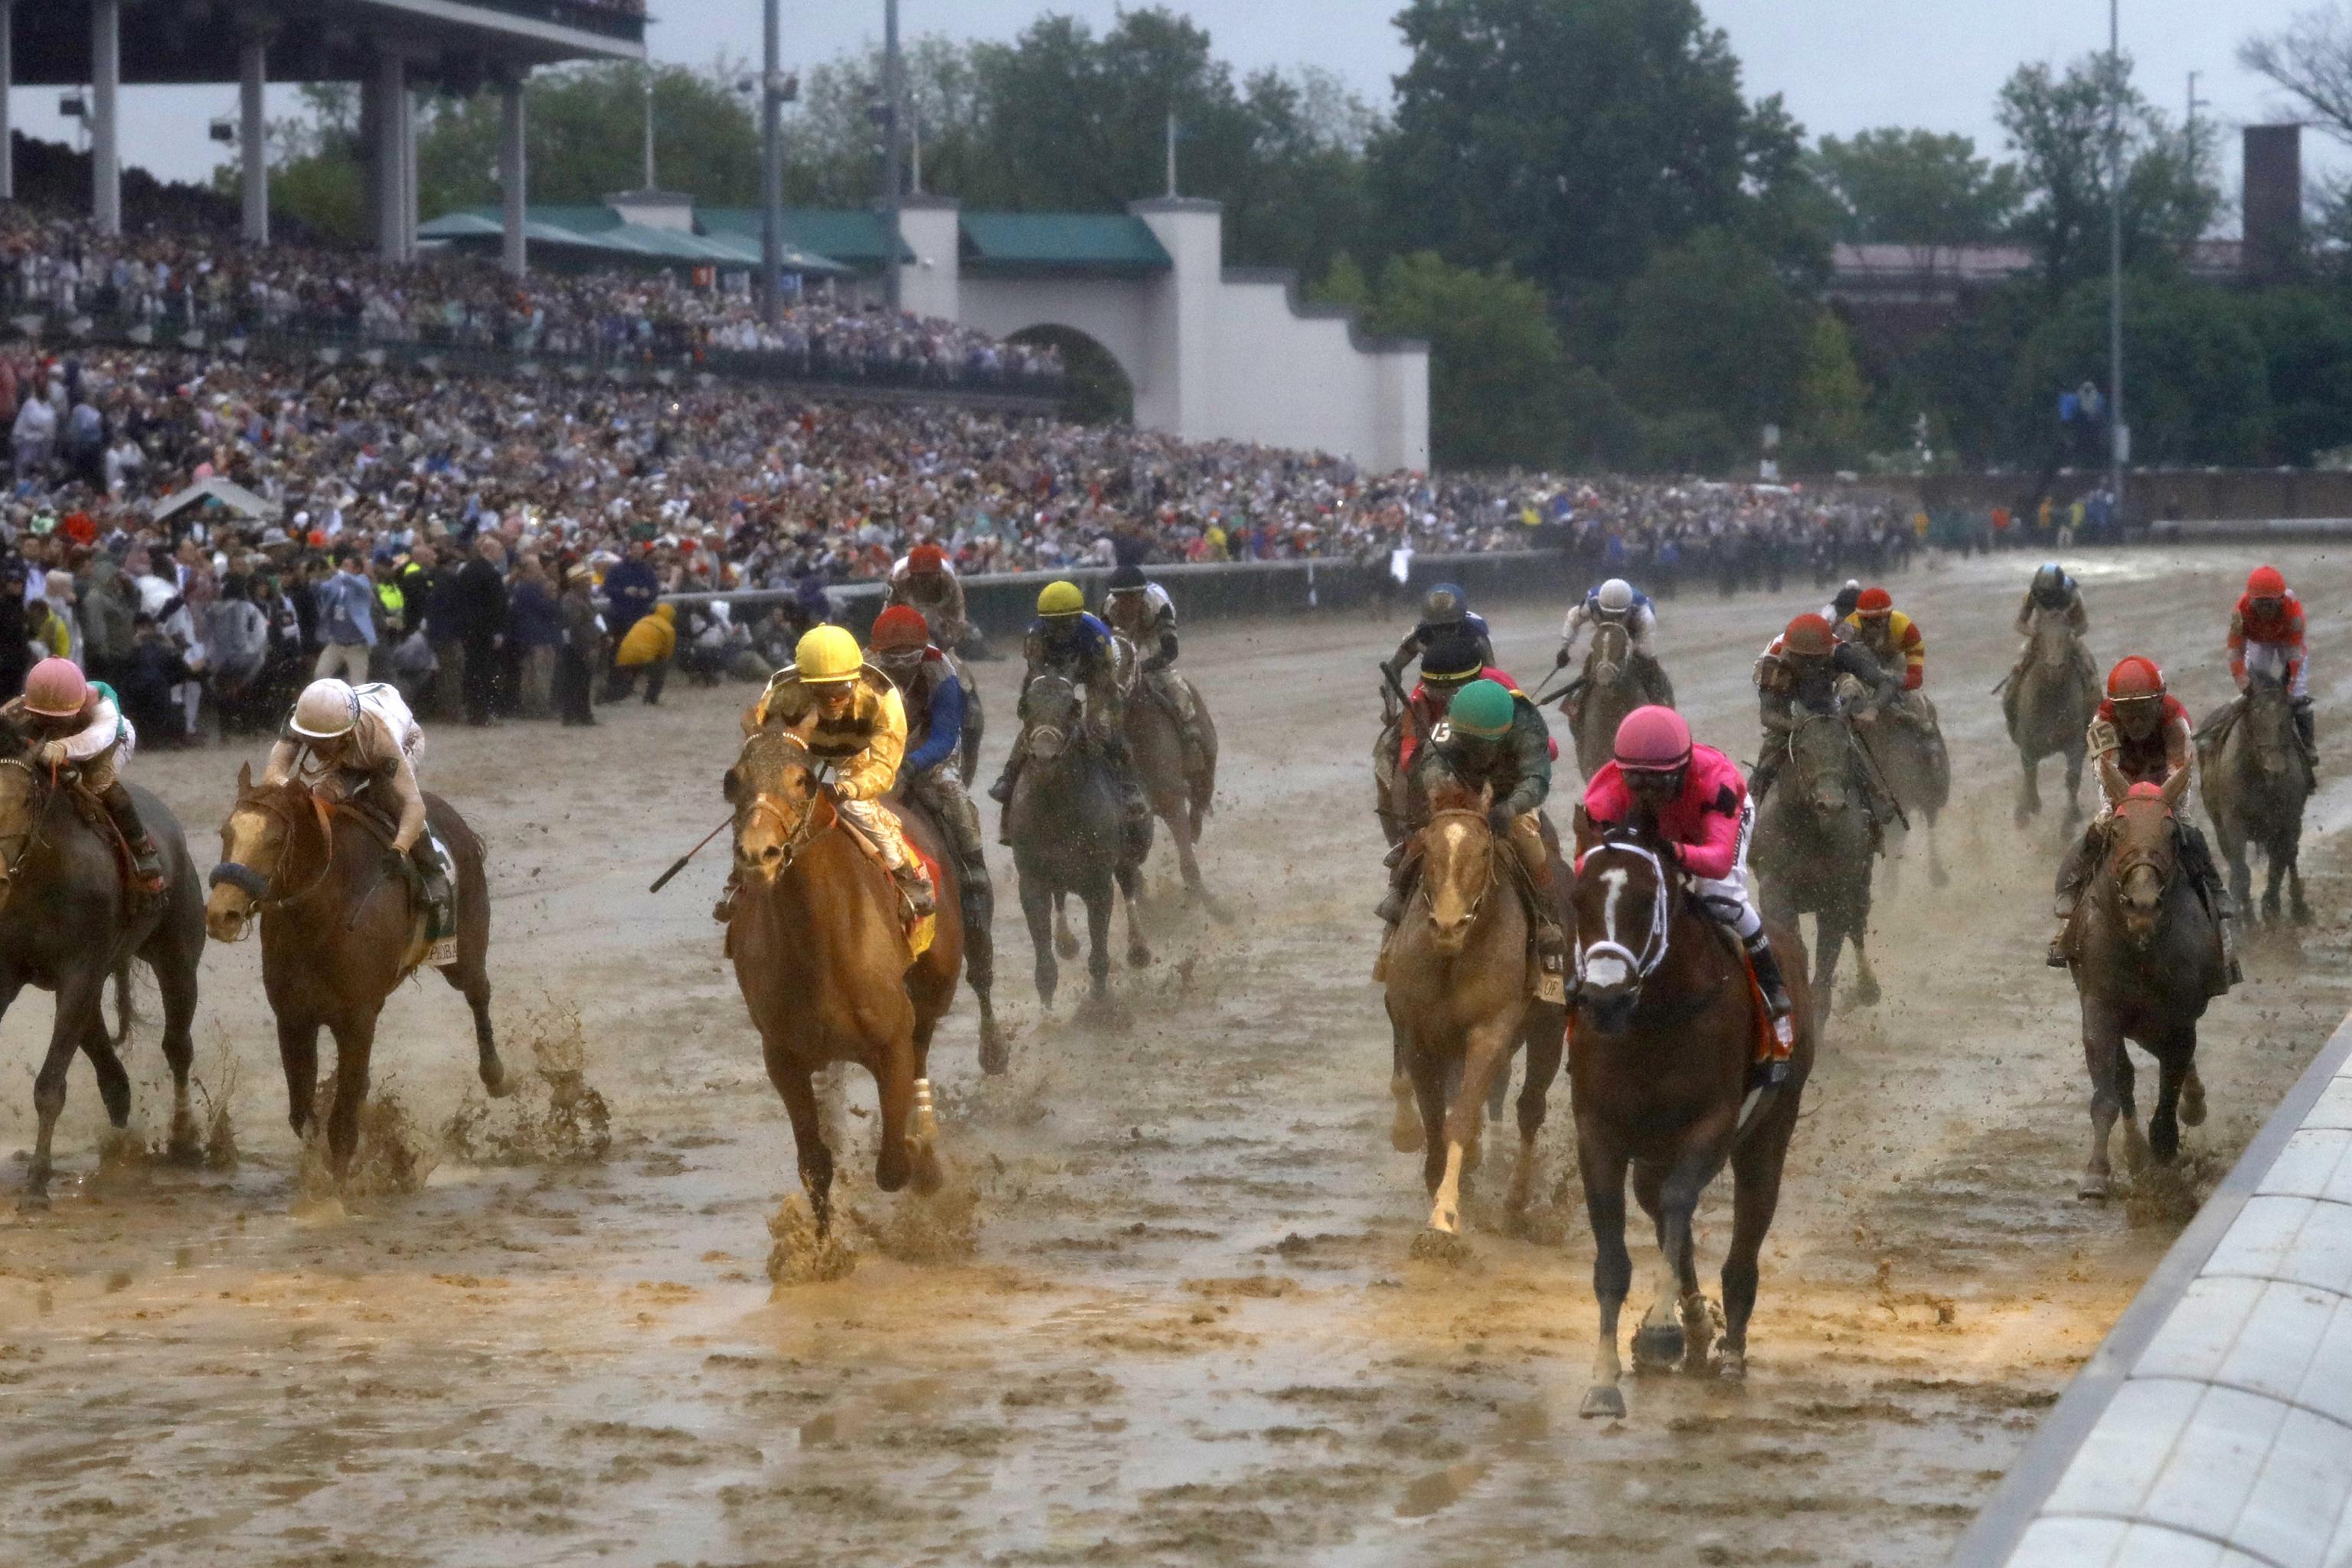 Kentucky Derby 2020 Post Positions Draw Start Time, Horses Lineup and More